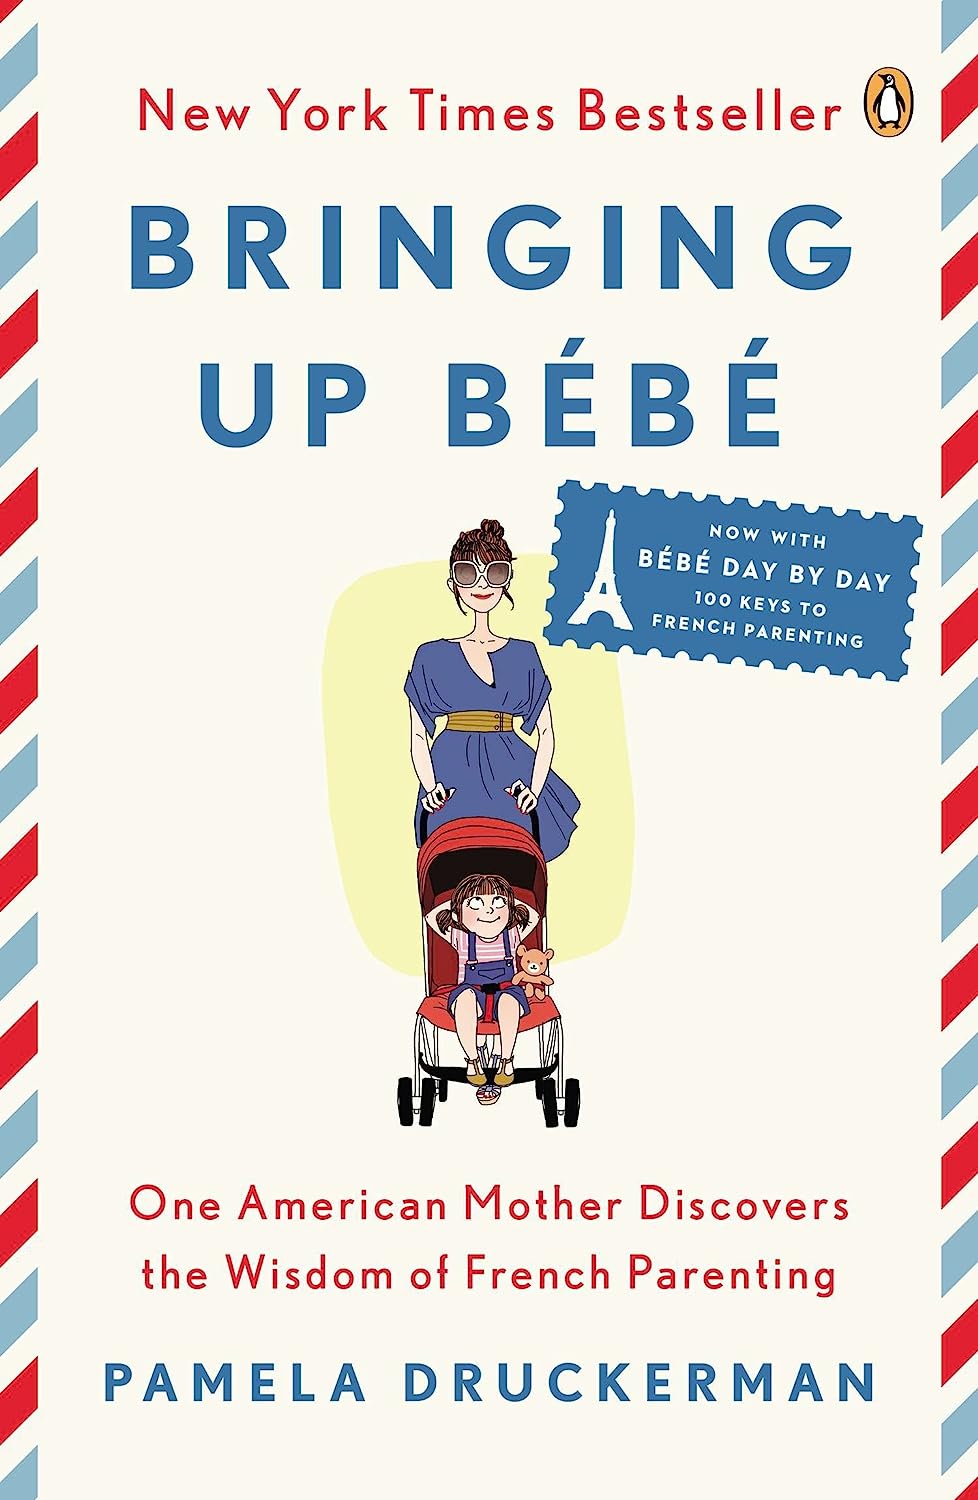 Image for " Bringing up bébé : one American mother discovers the wisdom of French parenting"